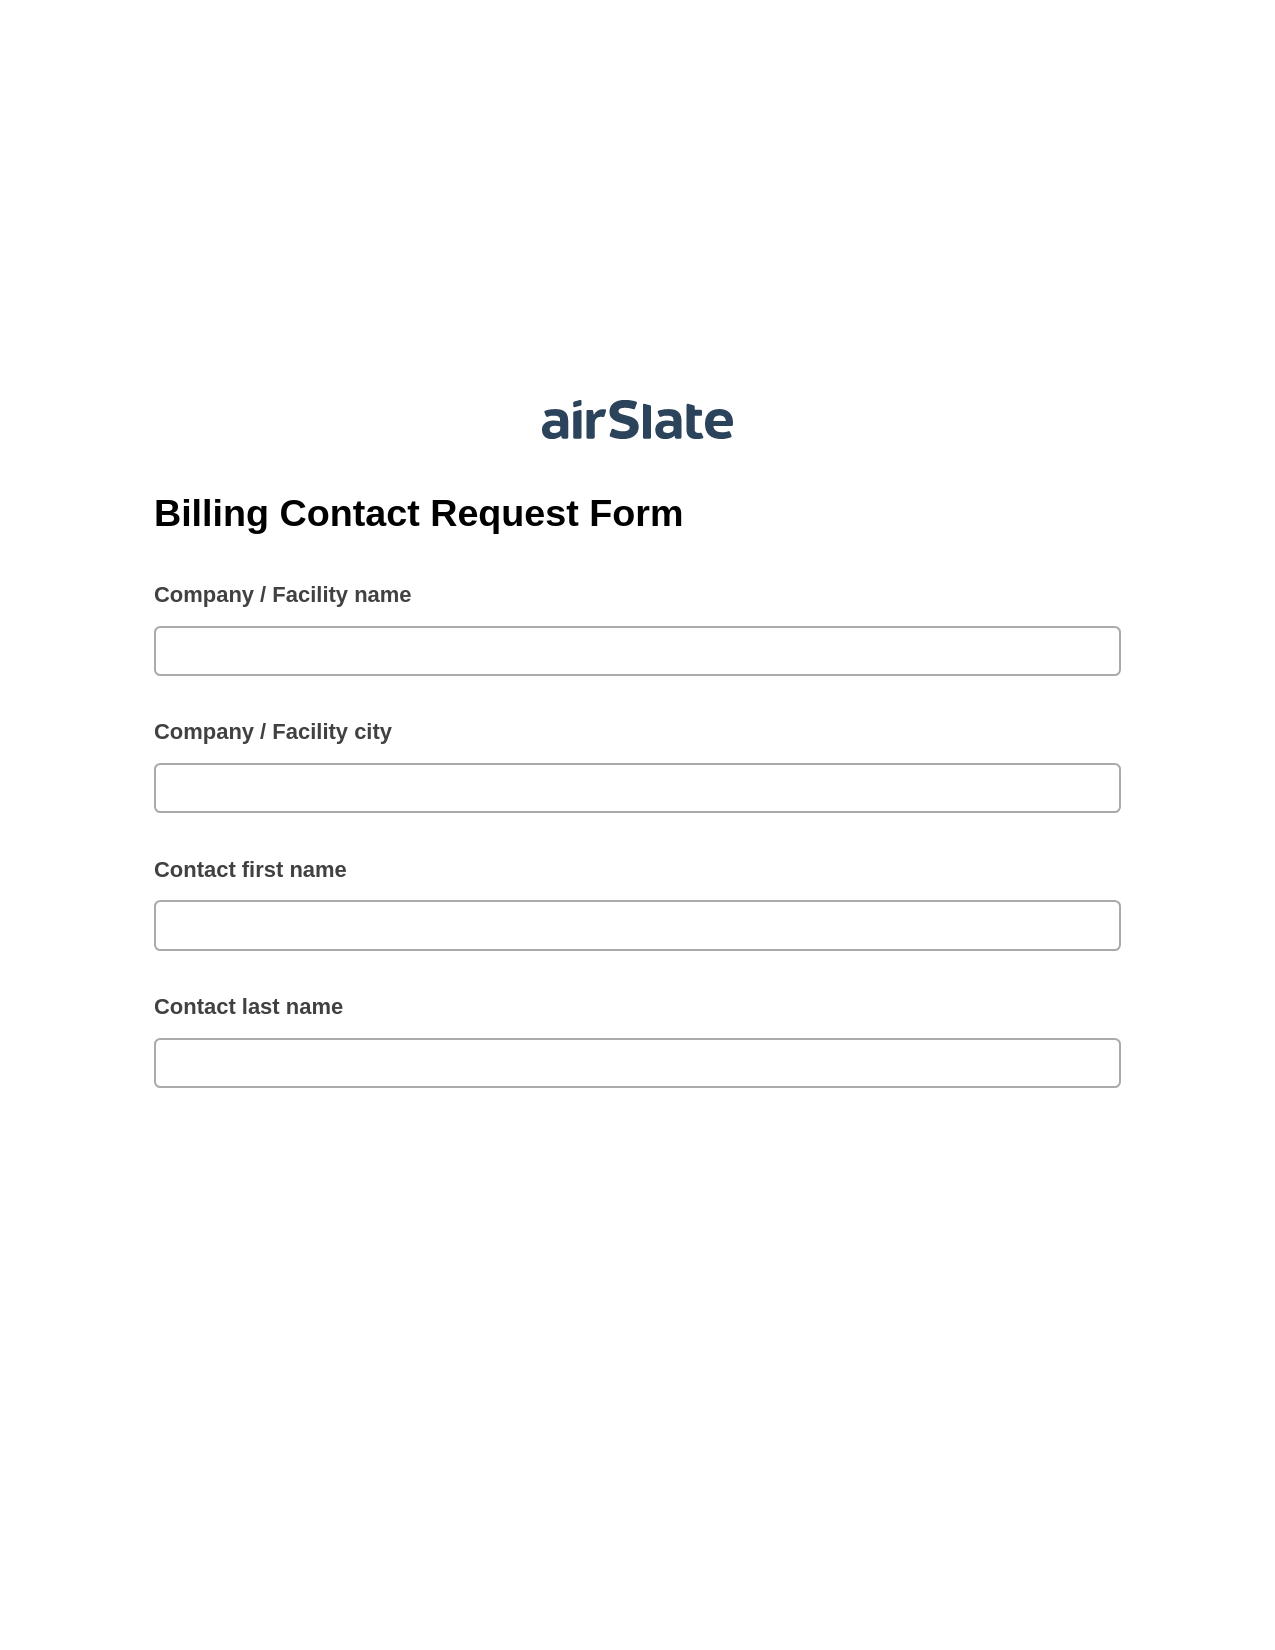 Billing Contact Request Form Pre-fill from Salesforce Record Bot, SendGrid send Campaign bot, Export to Excel 365 Bot